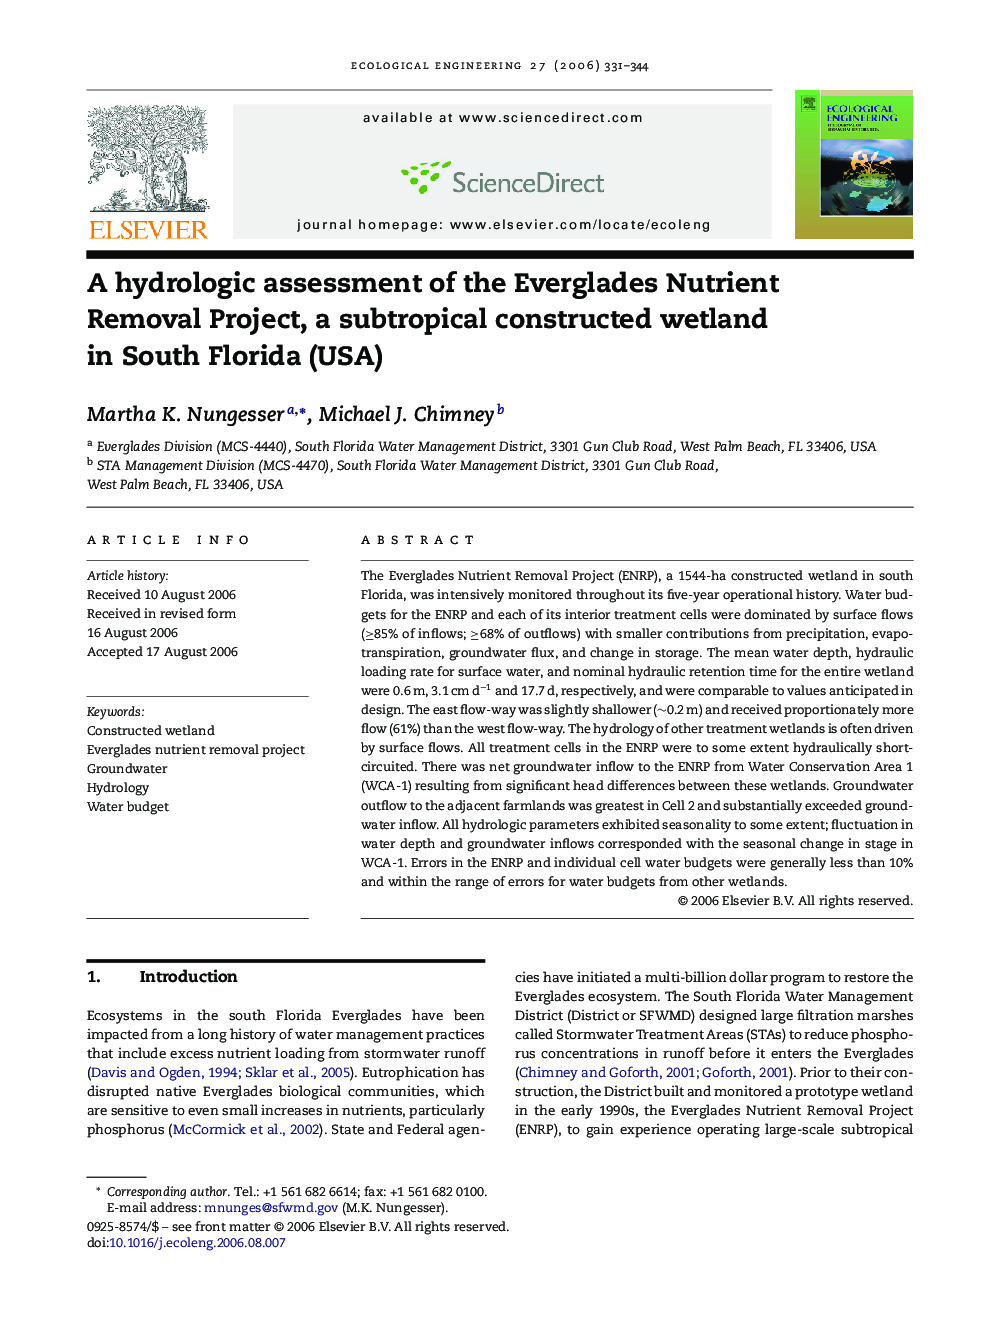 A hydrologic assessment of the Everglades Nutrient Removal Project, a subtropical constructed wetland in South Florida (USA)